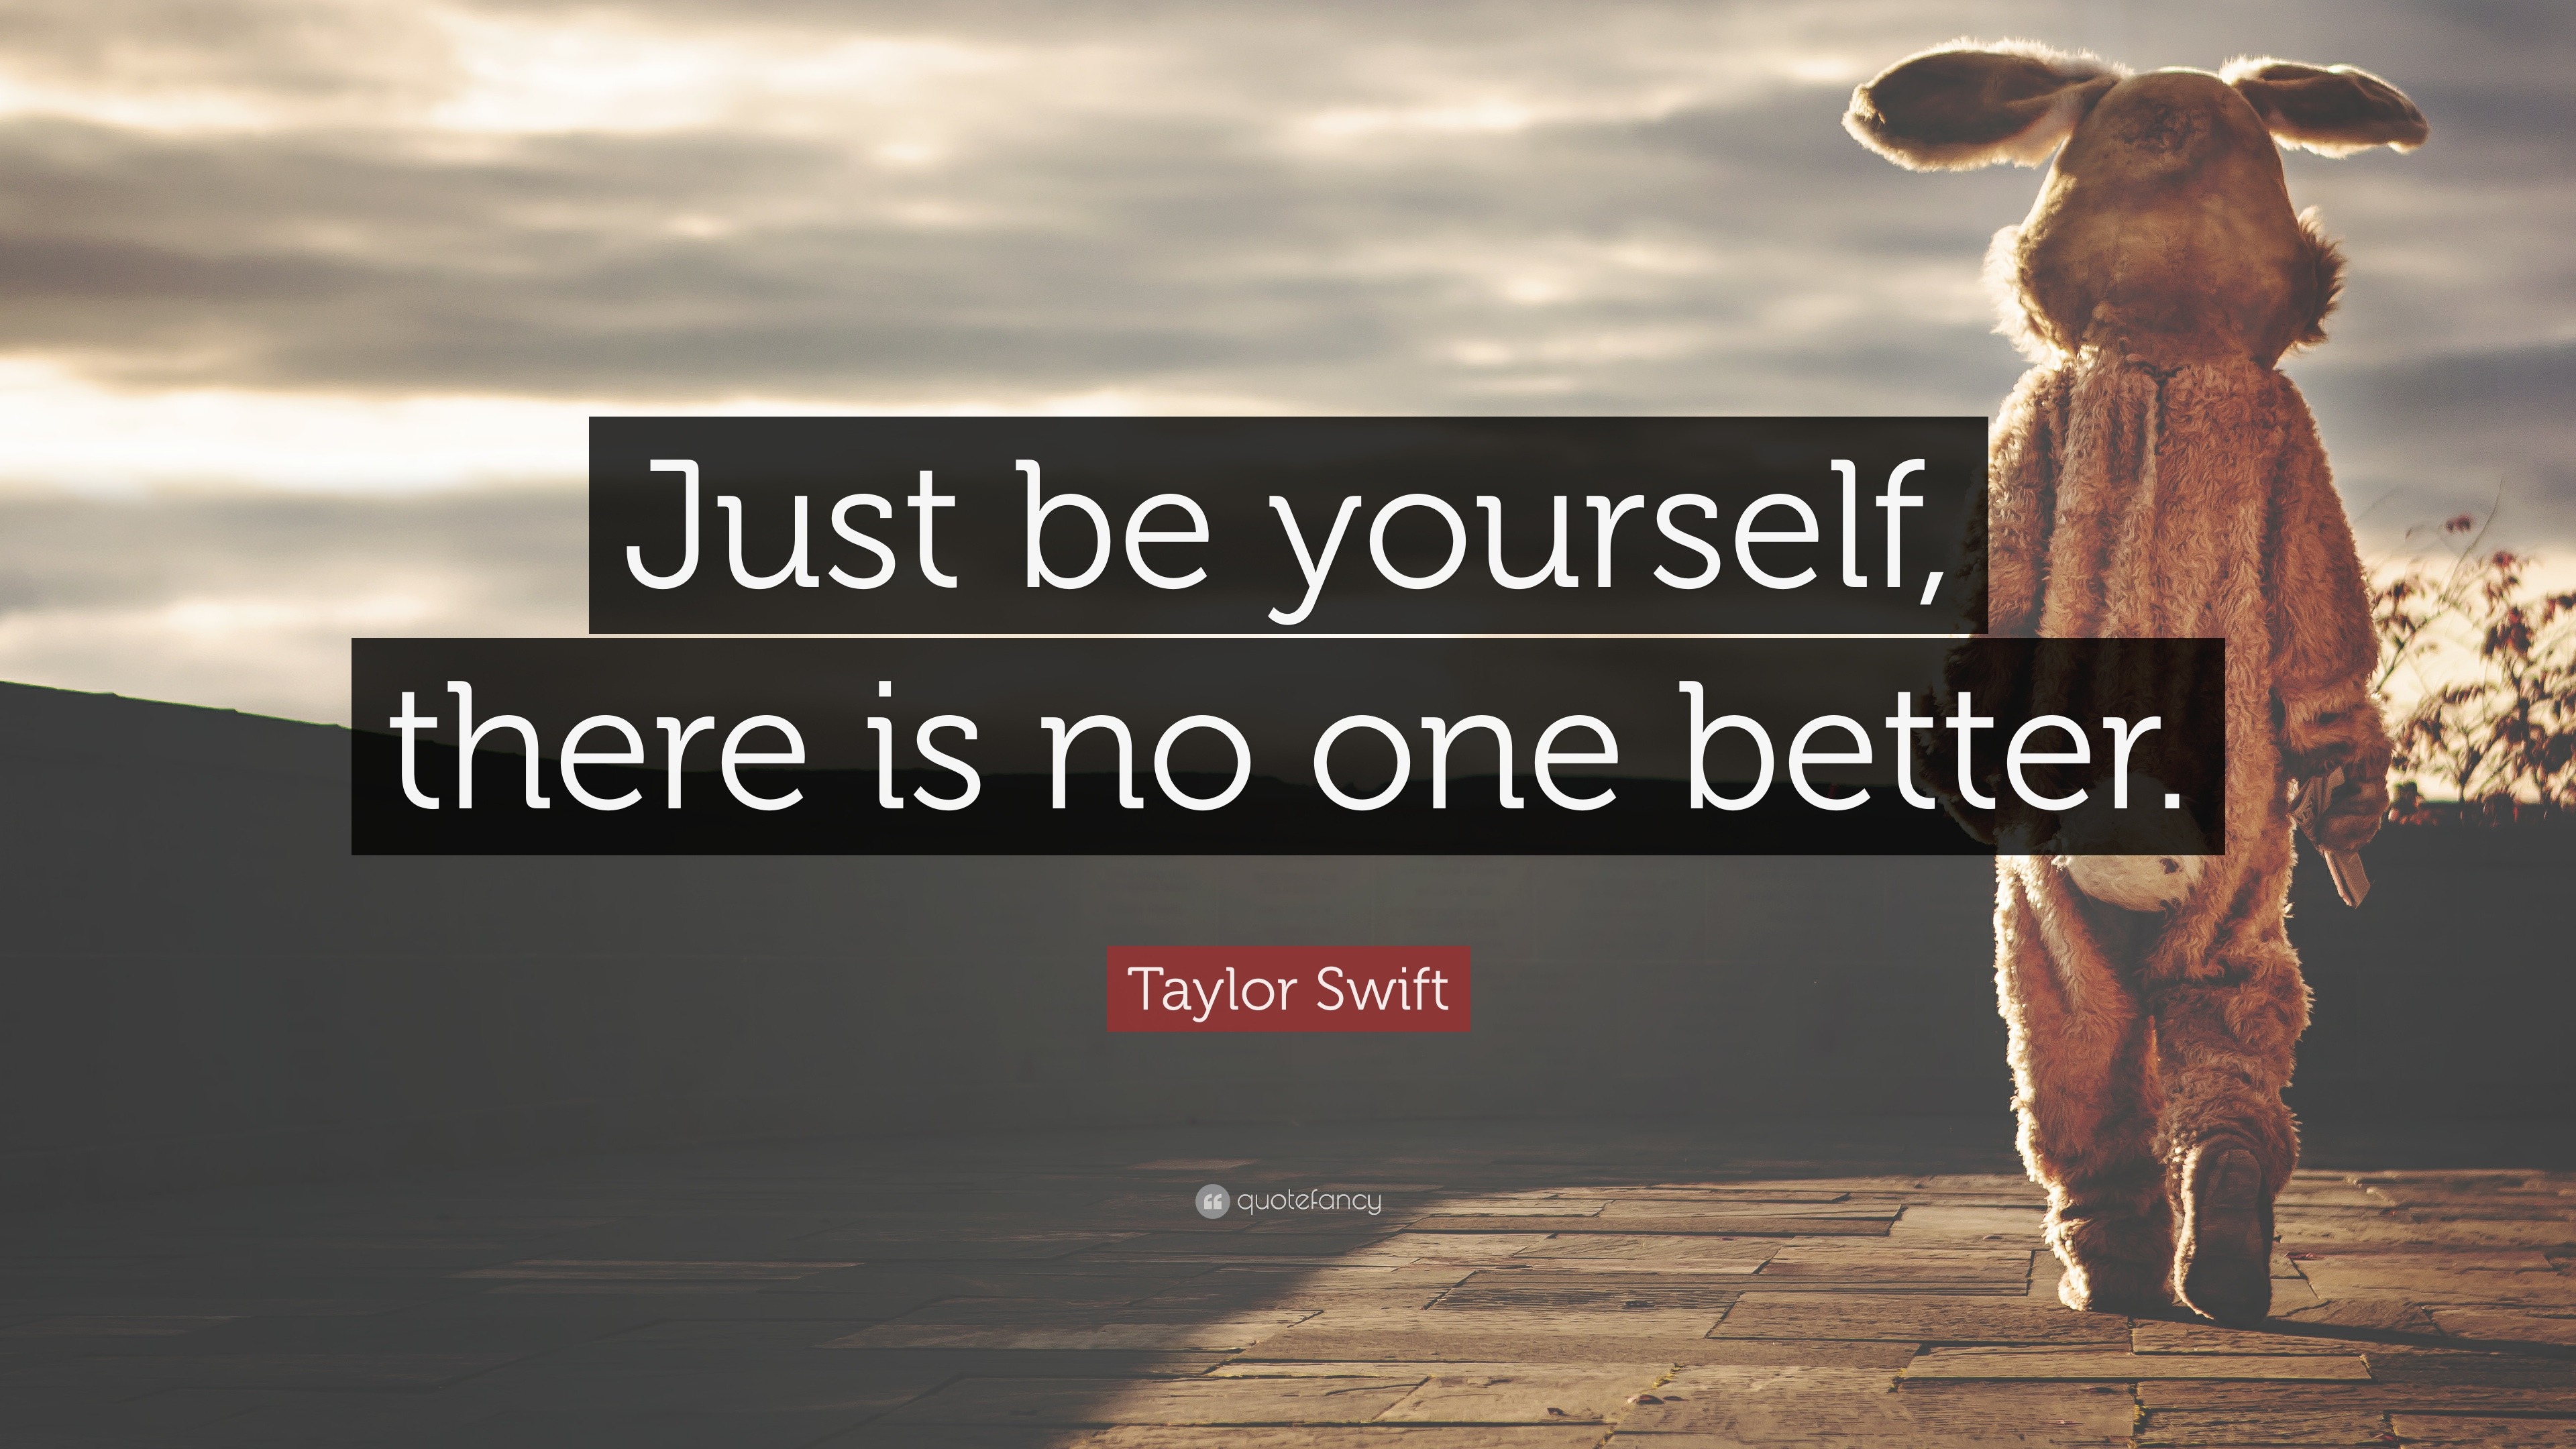 Taylor Swift Quote: “Just be yourself, there is no one better.” (22